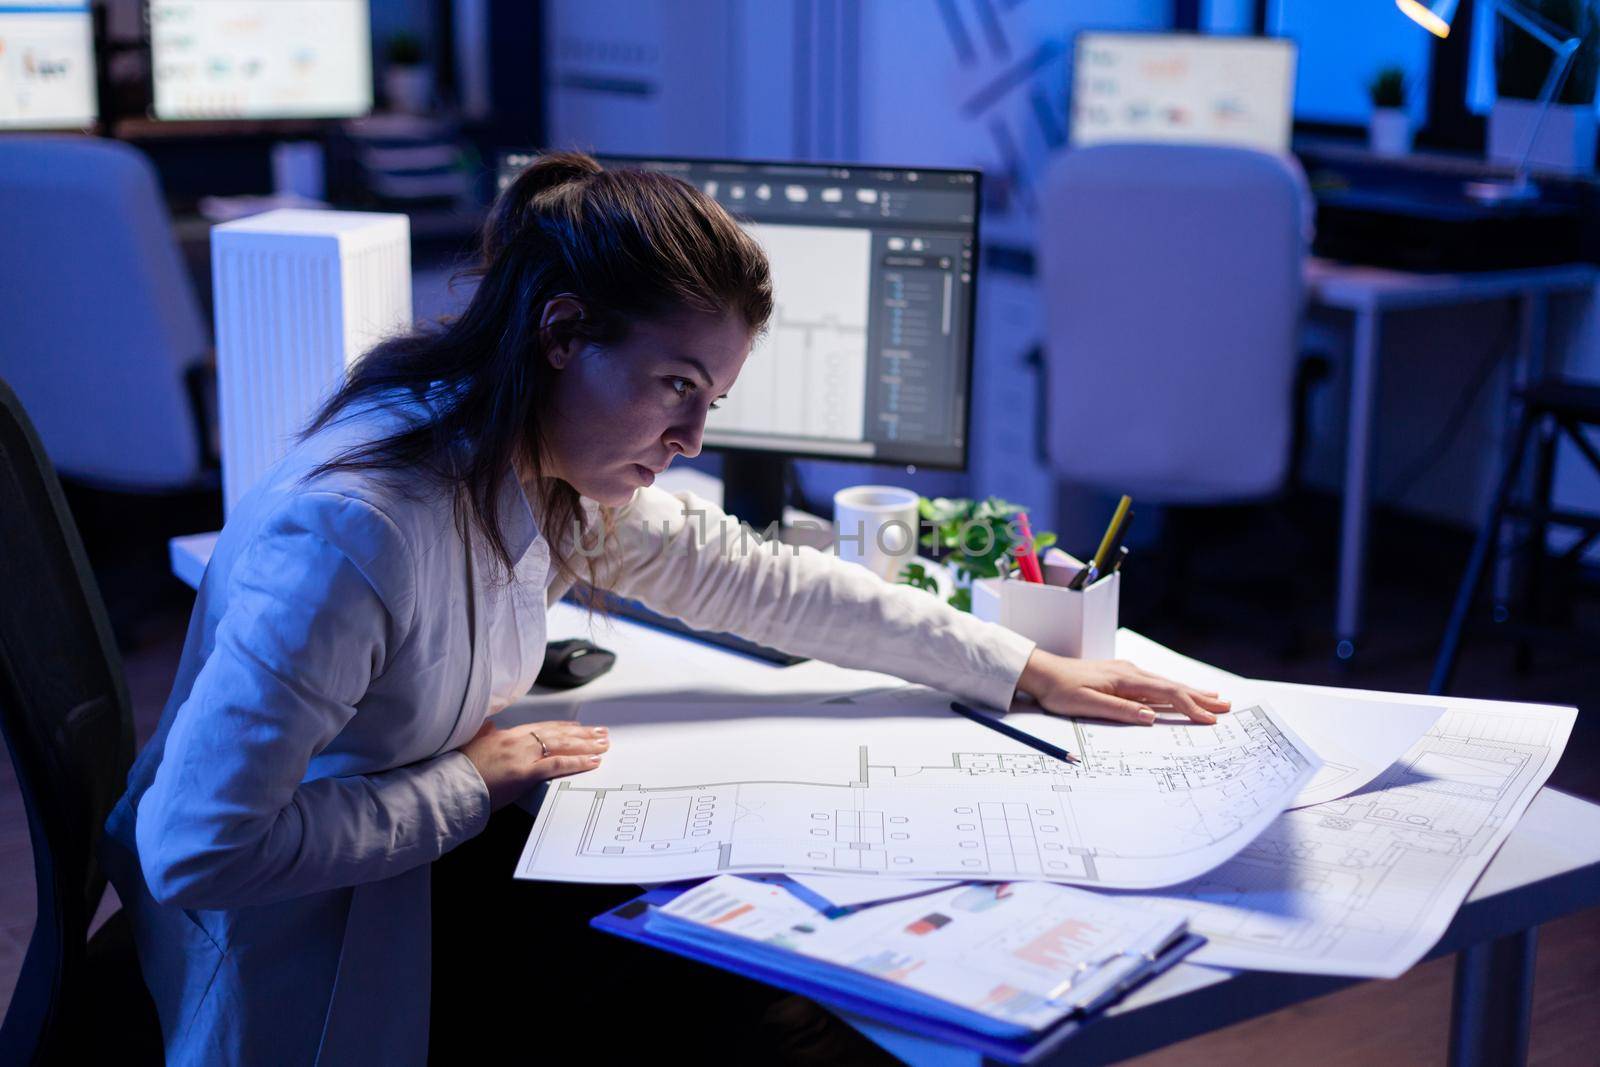 Overworked woman architect checking and matching blueprints sitting at office desk in front of computer. Perfectionist designer using arhitecture blueprints of buildings creating industrial prototype